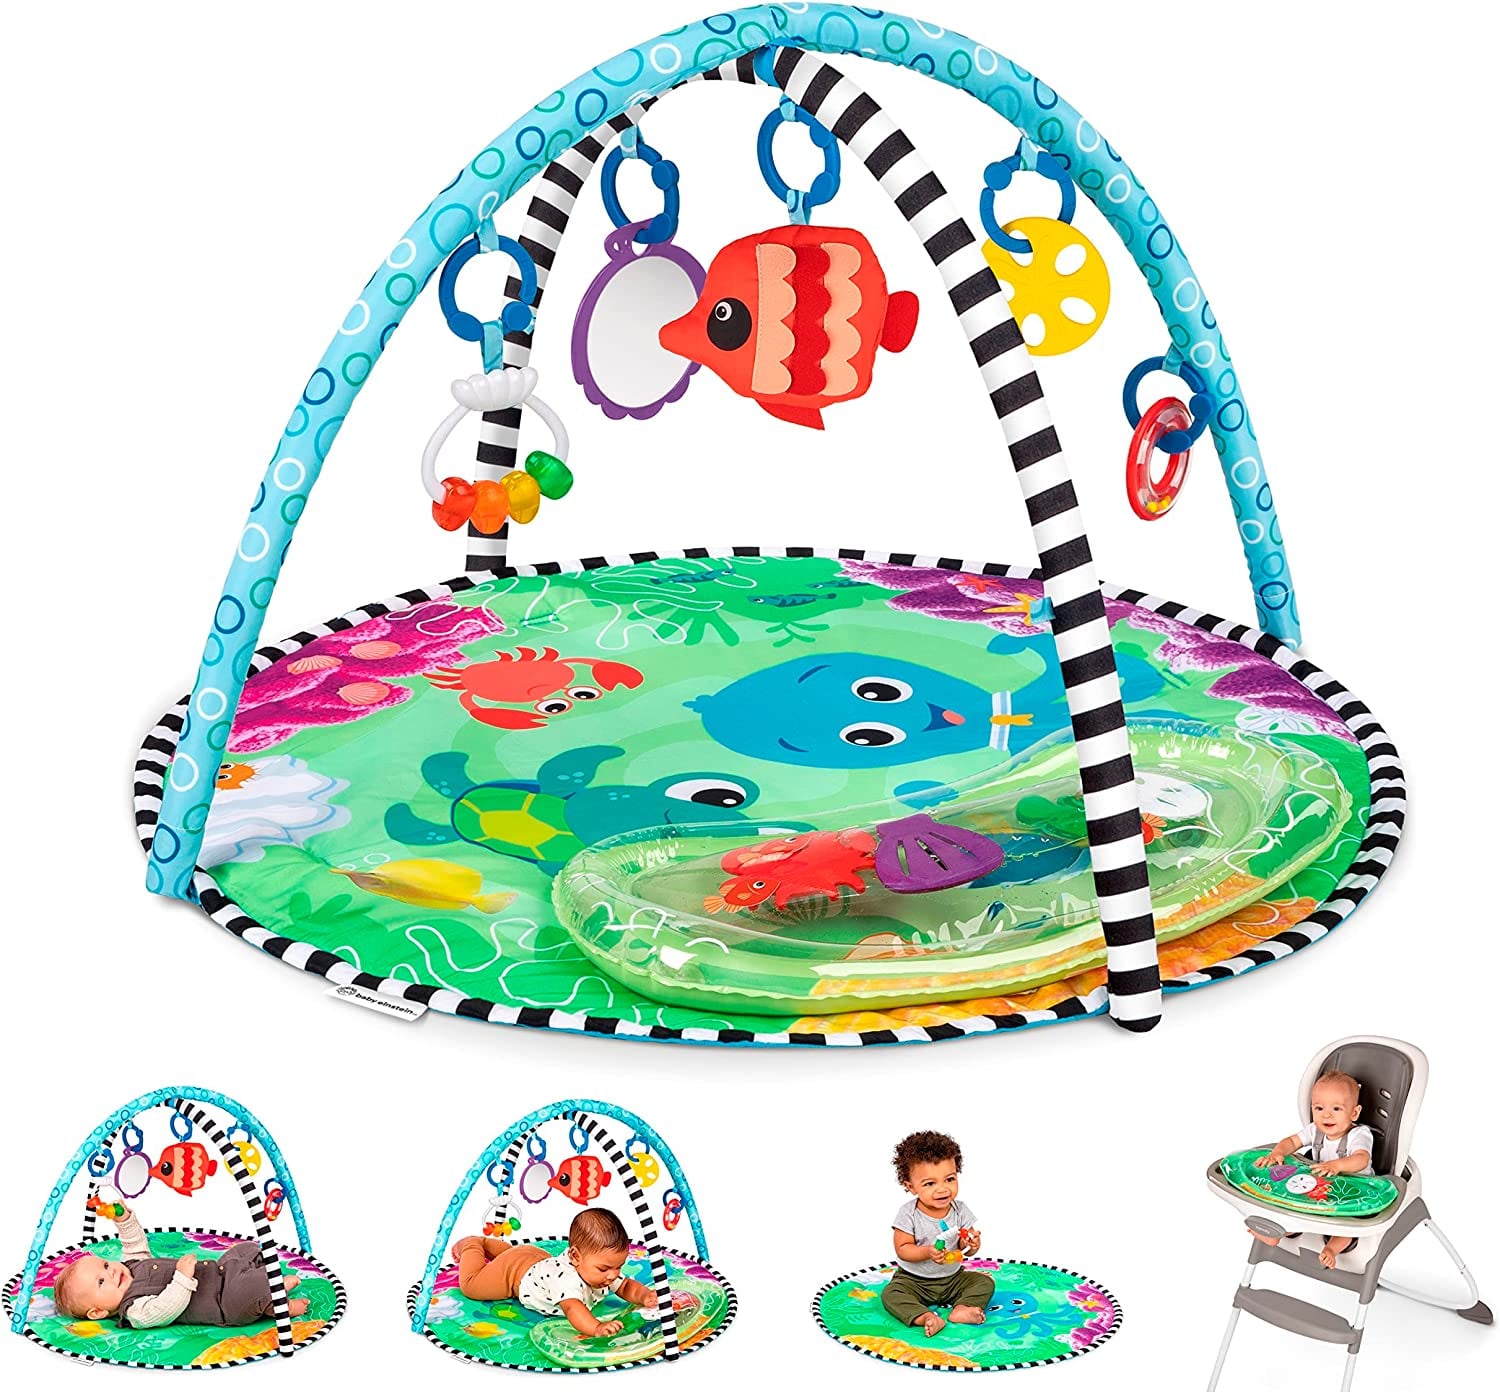 <p><a href="http://www.amazon.com/Baby-Einstein-Explorers-Portable-Activity/dp/B017RAK5LO">BUY NOW</a></p><p>$40</p><p><a href="http://www.amazon.com/Baby-Einstein-Explorers-Portable-Activity/dp/B017RAK5LO" class="editor-rtfLink ga-track"><strong>Baby Einstein 2-in-1 Water Play Mat & Activity Gym</strong></a> ($40)</p> <p>Make a splash, minus the mess, by turning tummy time into a deep-sea adventure with this fun water play mat and activity gym. "Play mats like this one encourage babies to reach and grasp, working on hand-eye skills," Dr. Stovall. </p> <p>Many water tummy time options have the water feature on the entire surface of the play mat. But Baby Einstein's is small and detaches, so you can use it on the go or later to entertain a babe in a high chair as you make dinner. "Ensure all toys are securely attached to the mat to remain safe," Dr. Stovall cautions. Plus, the mat has other toys that engage multiple senses, like a plush fish chime and a baby-safe mirror. </p>